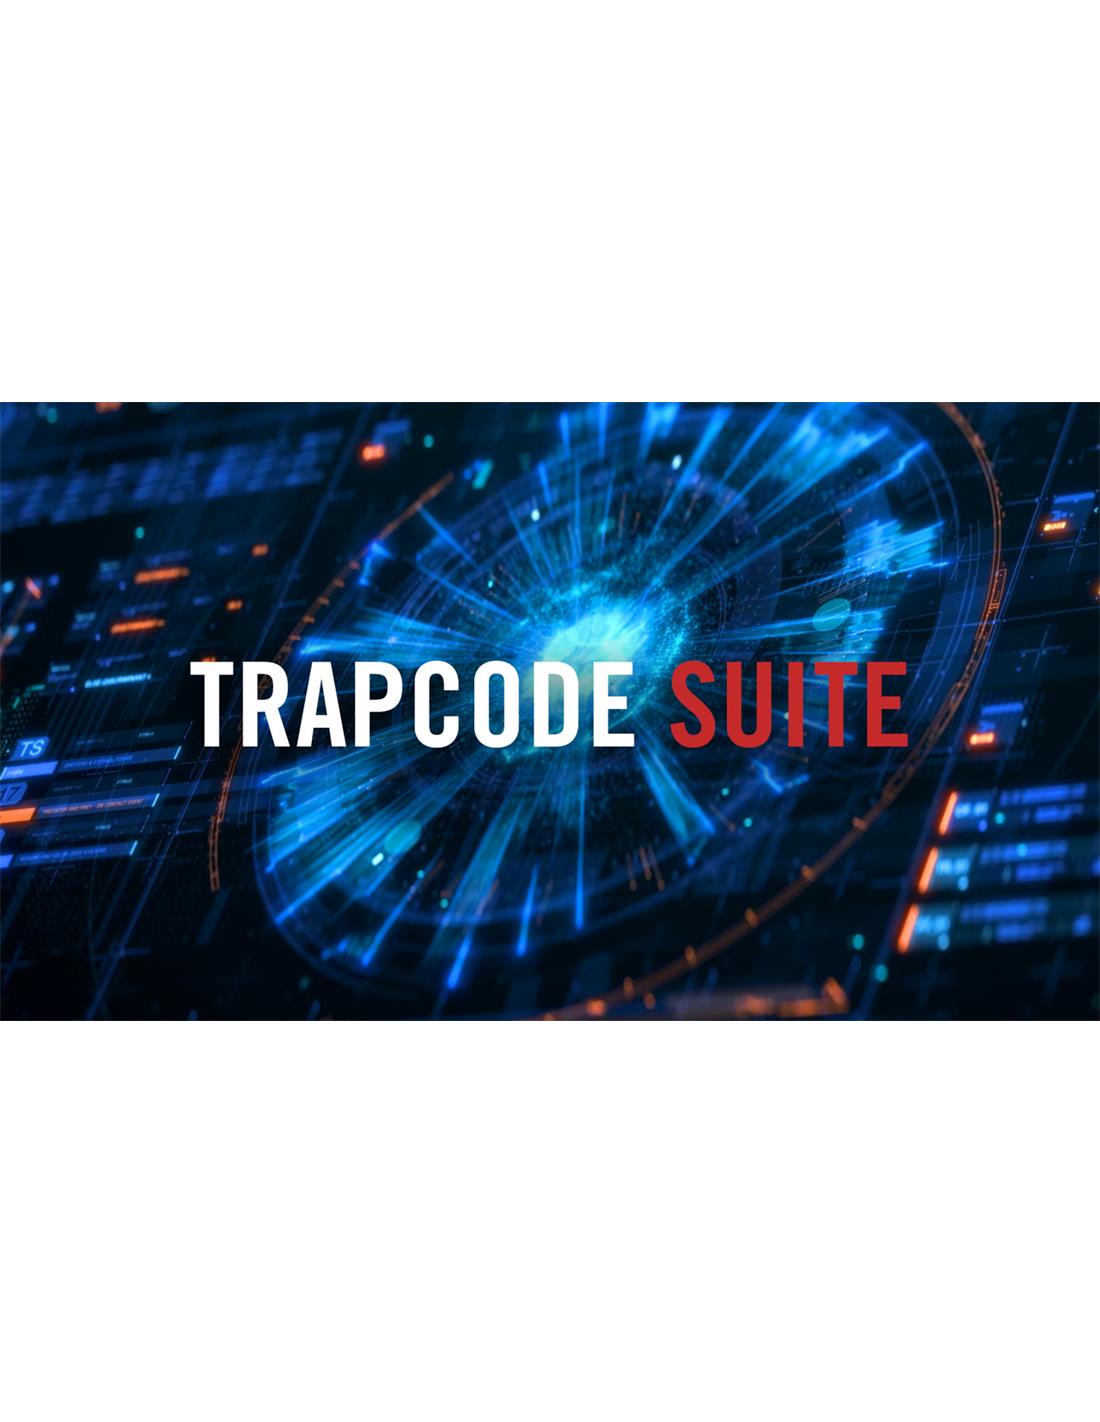 Red Giant Trapcode Suite 2024.0.1 instal the new for mac